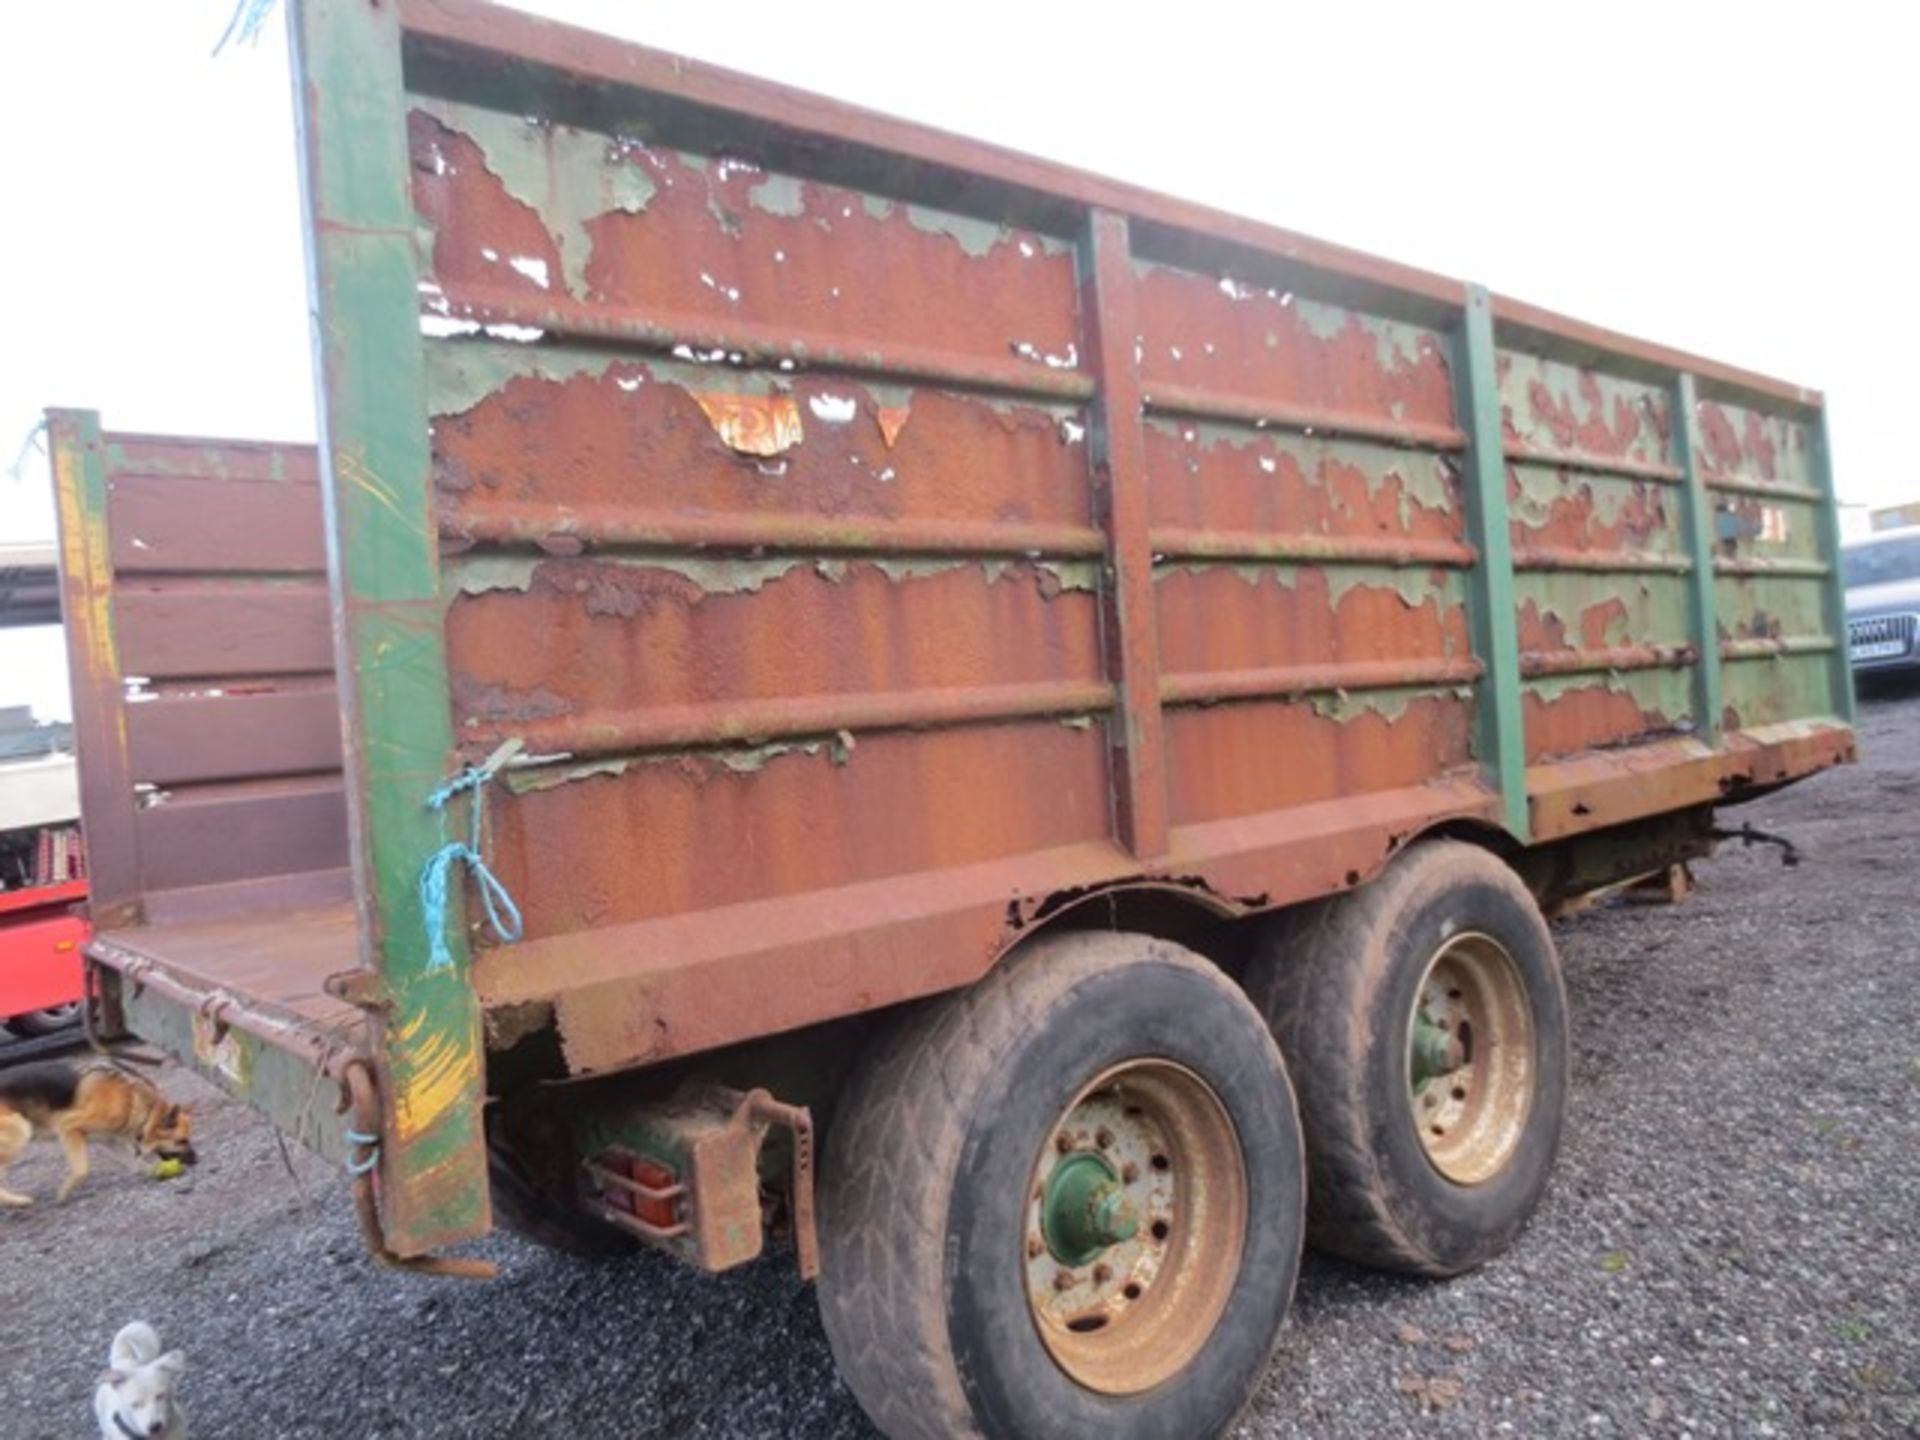 Fraser M18TS agricultural trailer, Serial No: 39156 (Poor condition) - Image 2 of 3